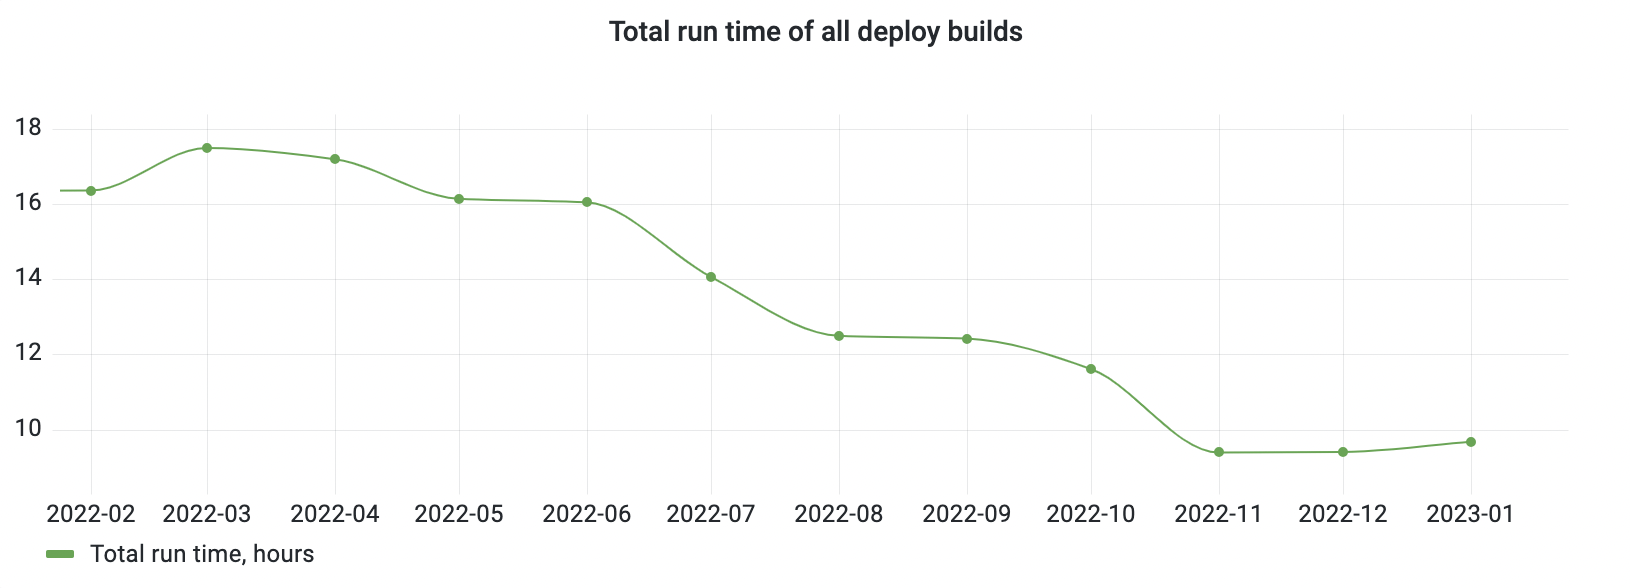 Total run time of all deploy builds